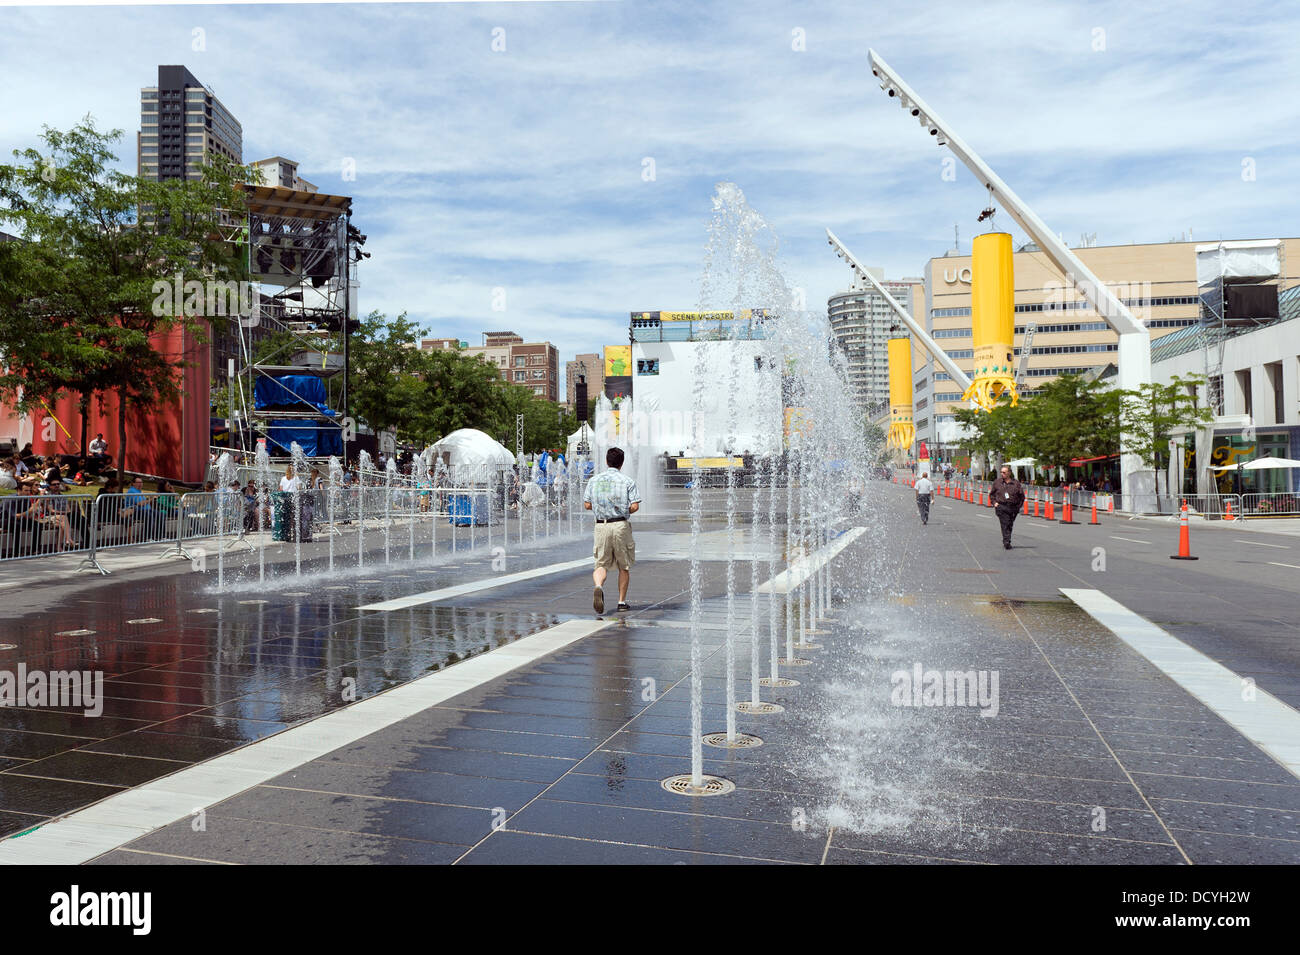 Place des festivals in downtown Montreal, province of Quebec, Canada. Stock Photo